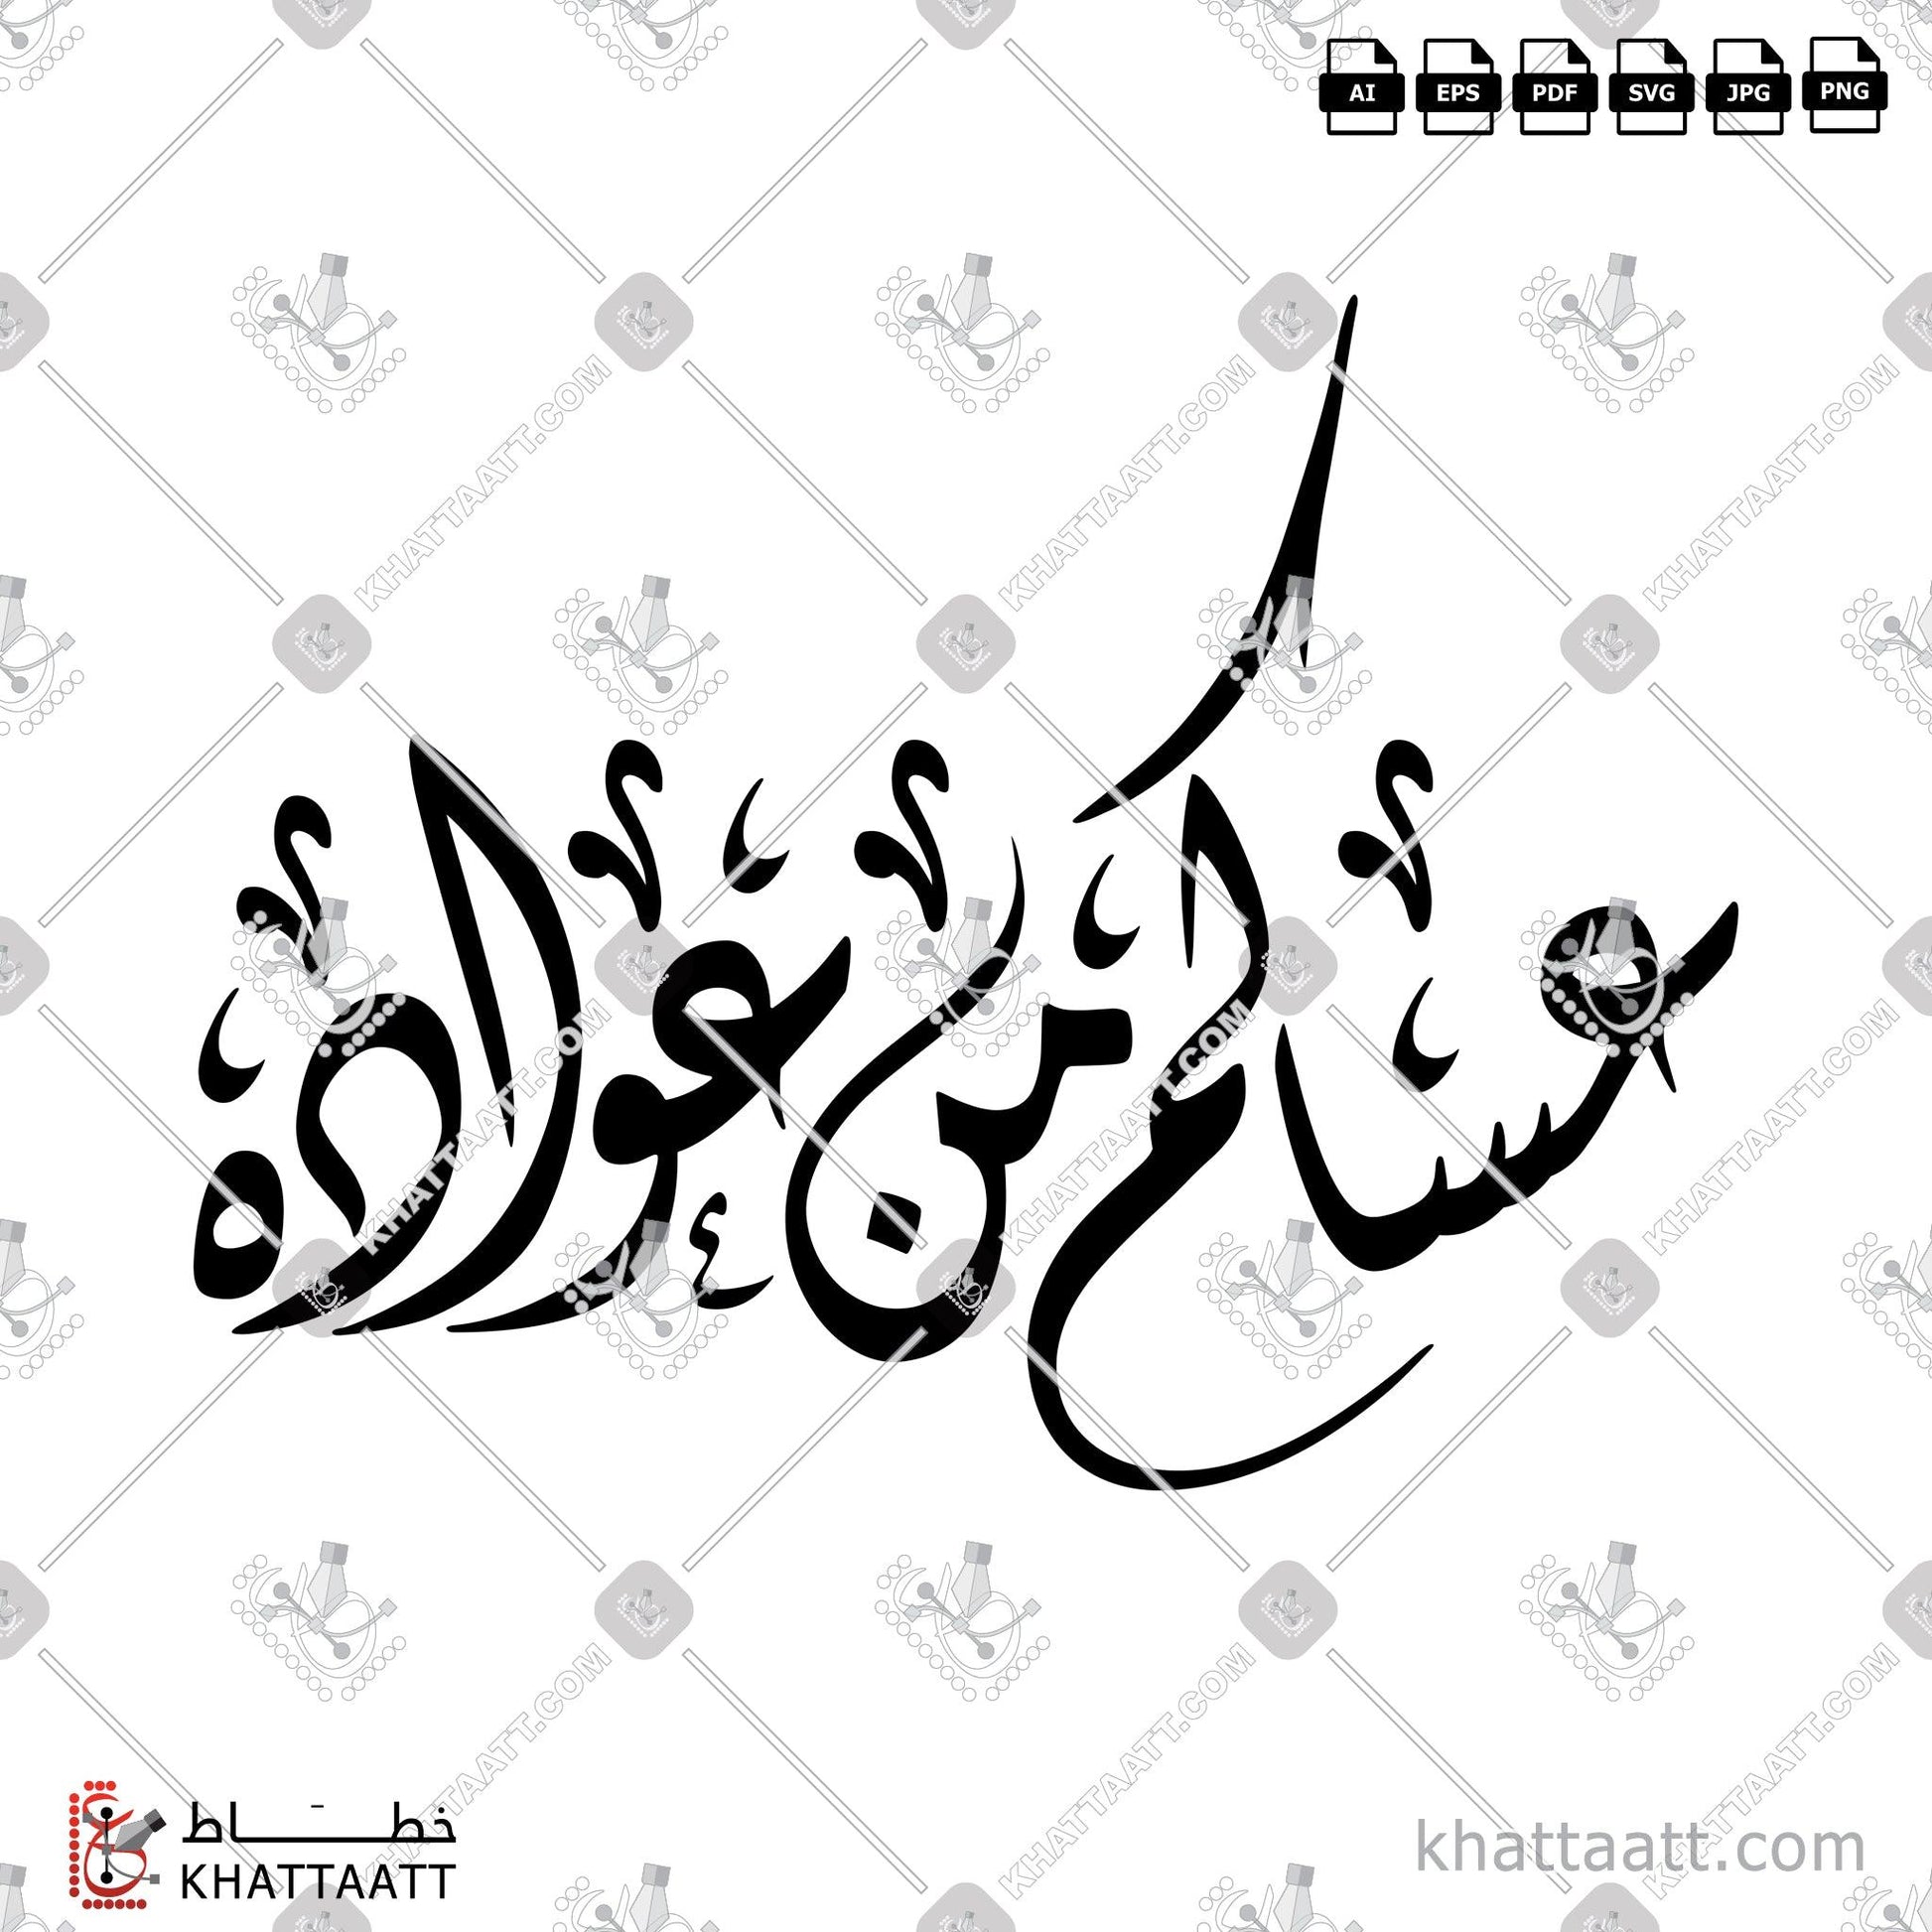 Download Arabic Calligraphy of عساكم من عواده in Diwani - الخط الديواني in vector and .png